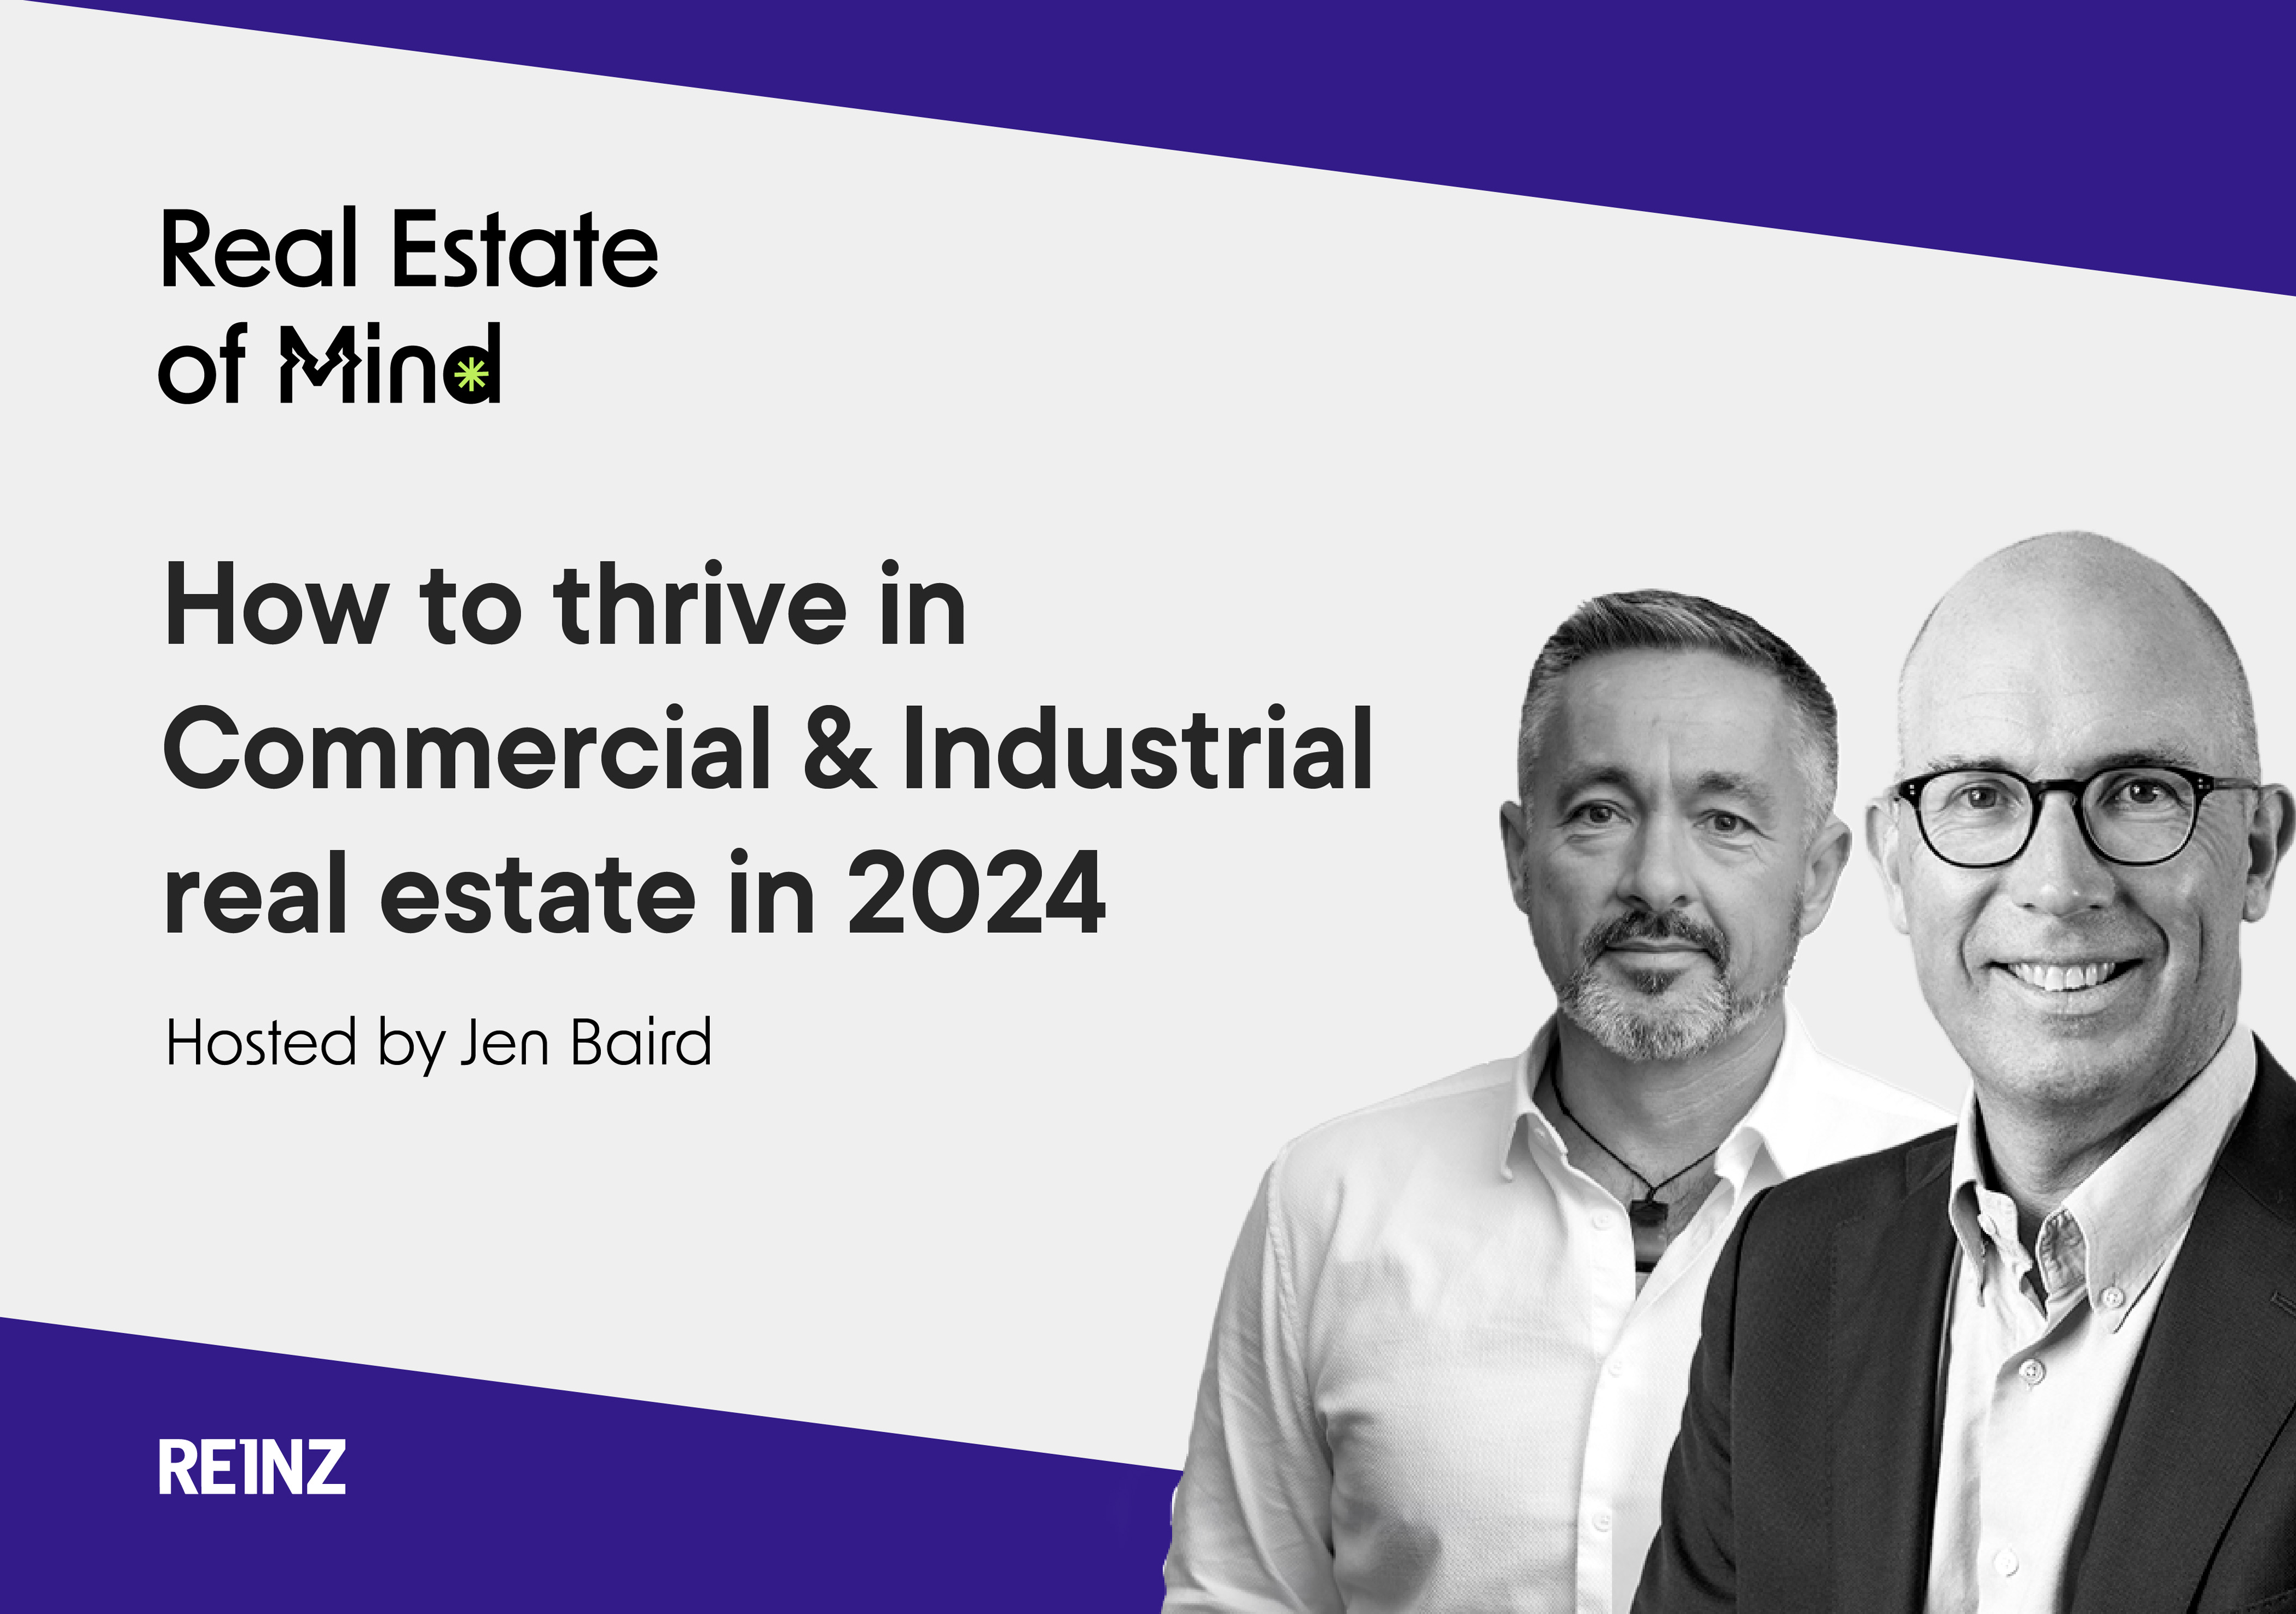 How to thrive in Commercial and Industrial real estate in 2024